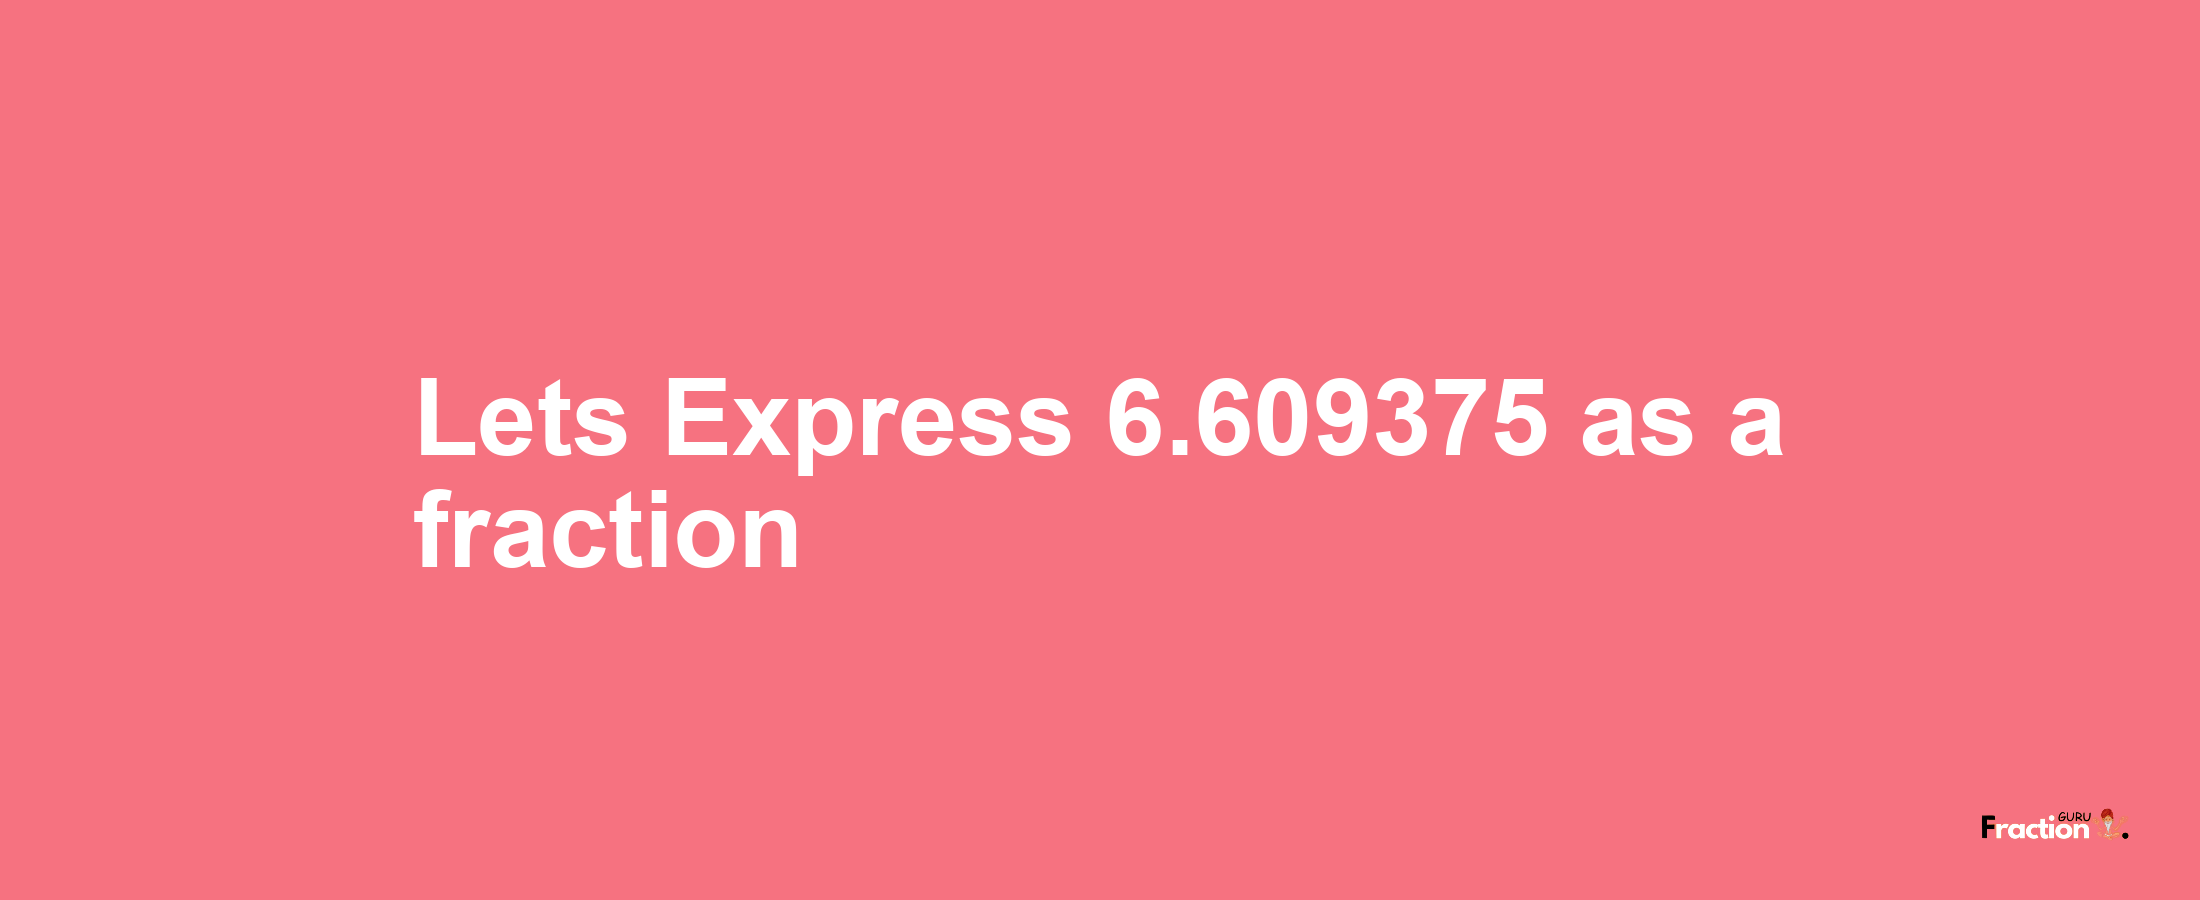 Lets Express 6.609375 as afraction